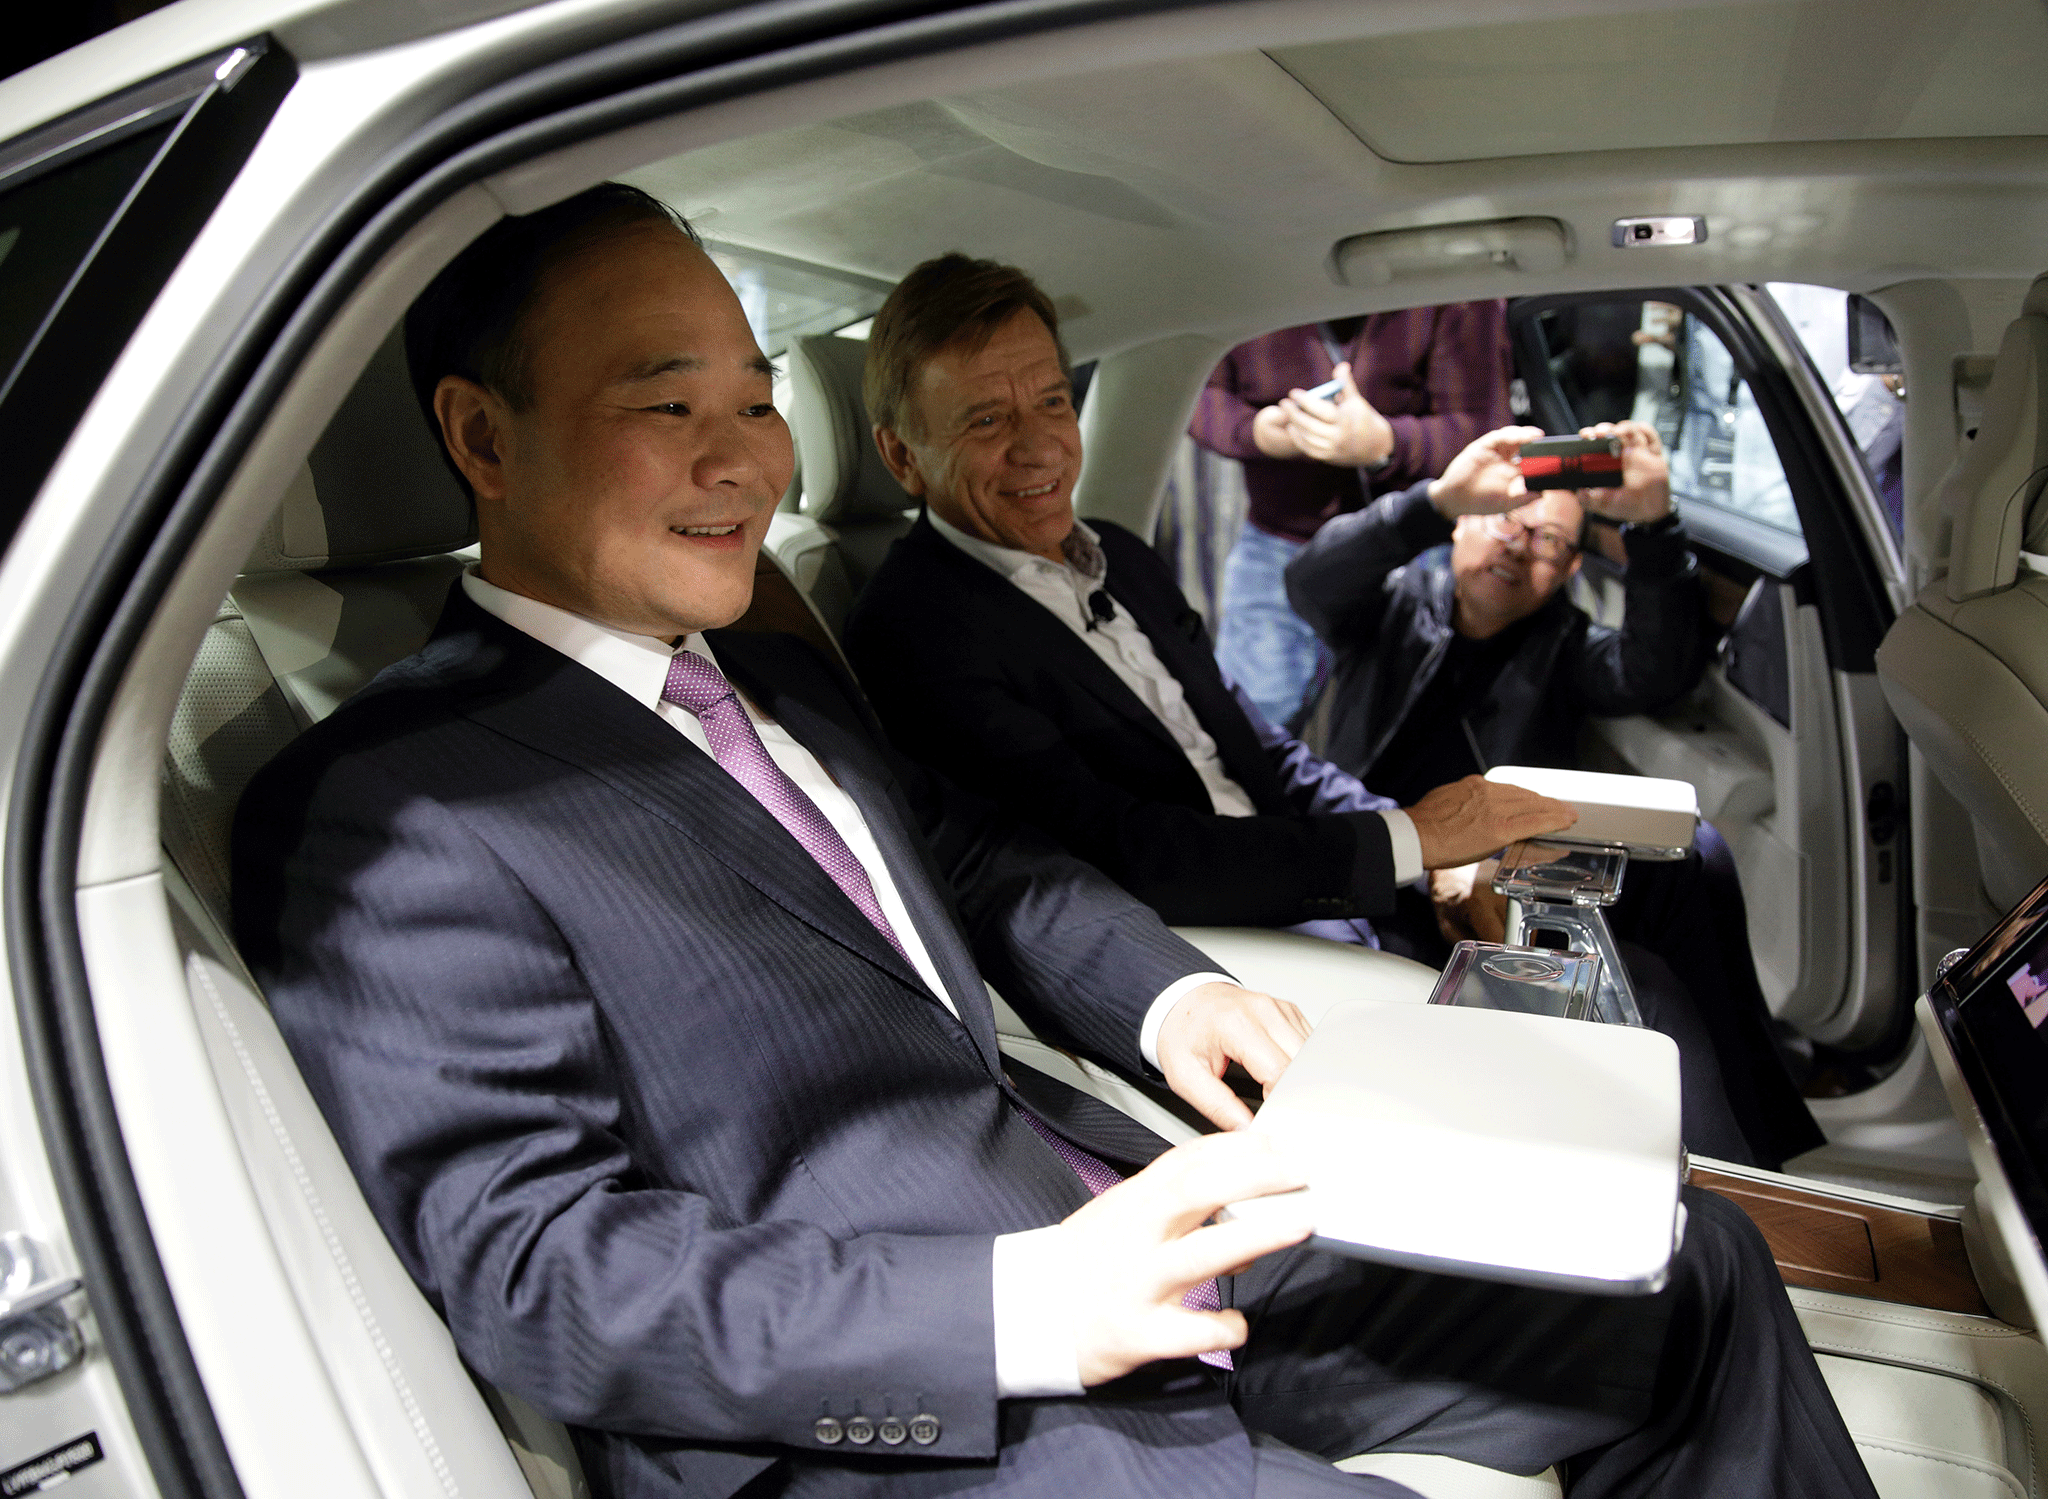 Li Shufu, founder and chairman of Geely Holding Group and Hakan Samuelsson, President and CEO of Volvo attend Volvo's S90 launch